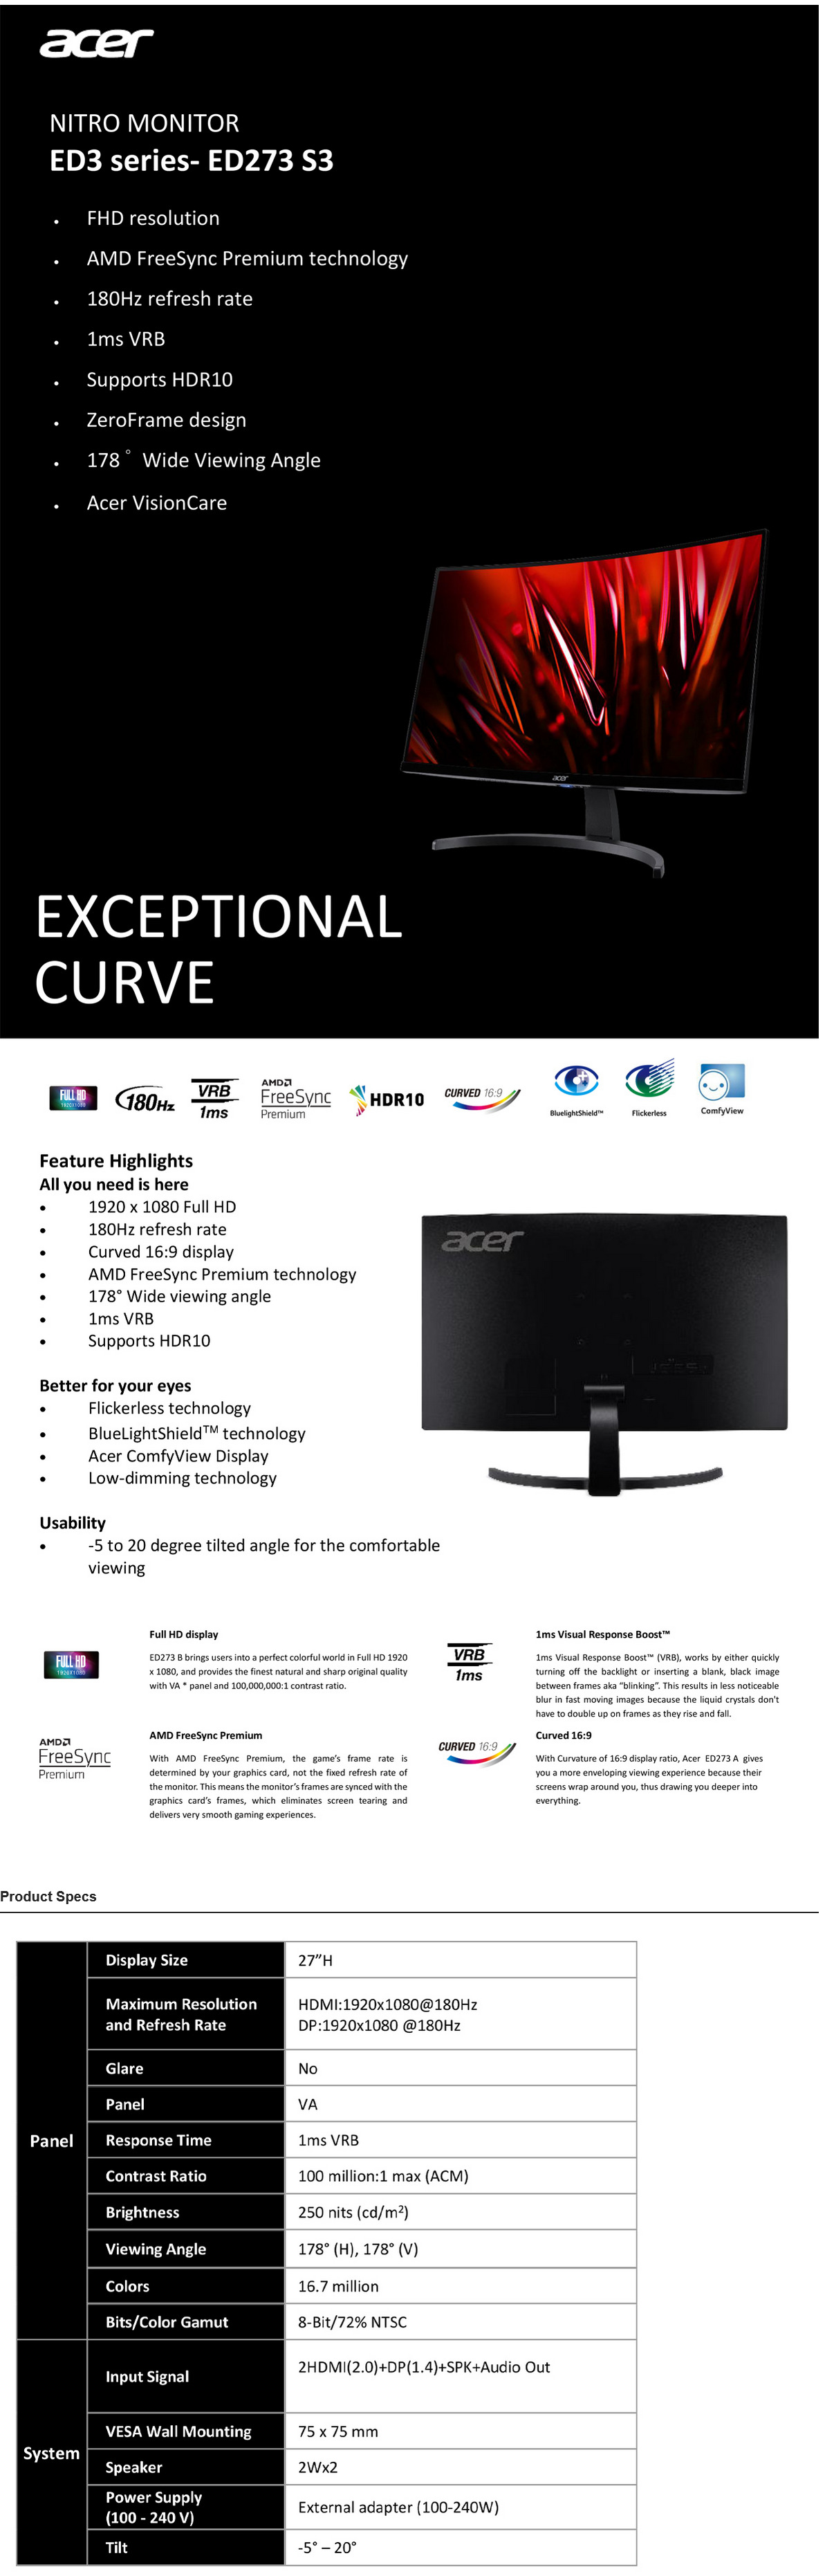 A large marketing image providing additional information about the product Acer Nitro ED273S3 - 27" Curved FHD 180Hz VA Monitor - Additional alt info not provided